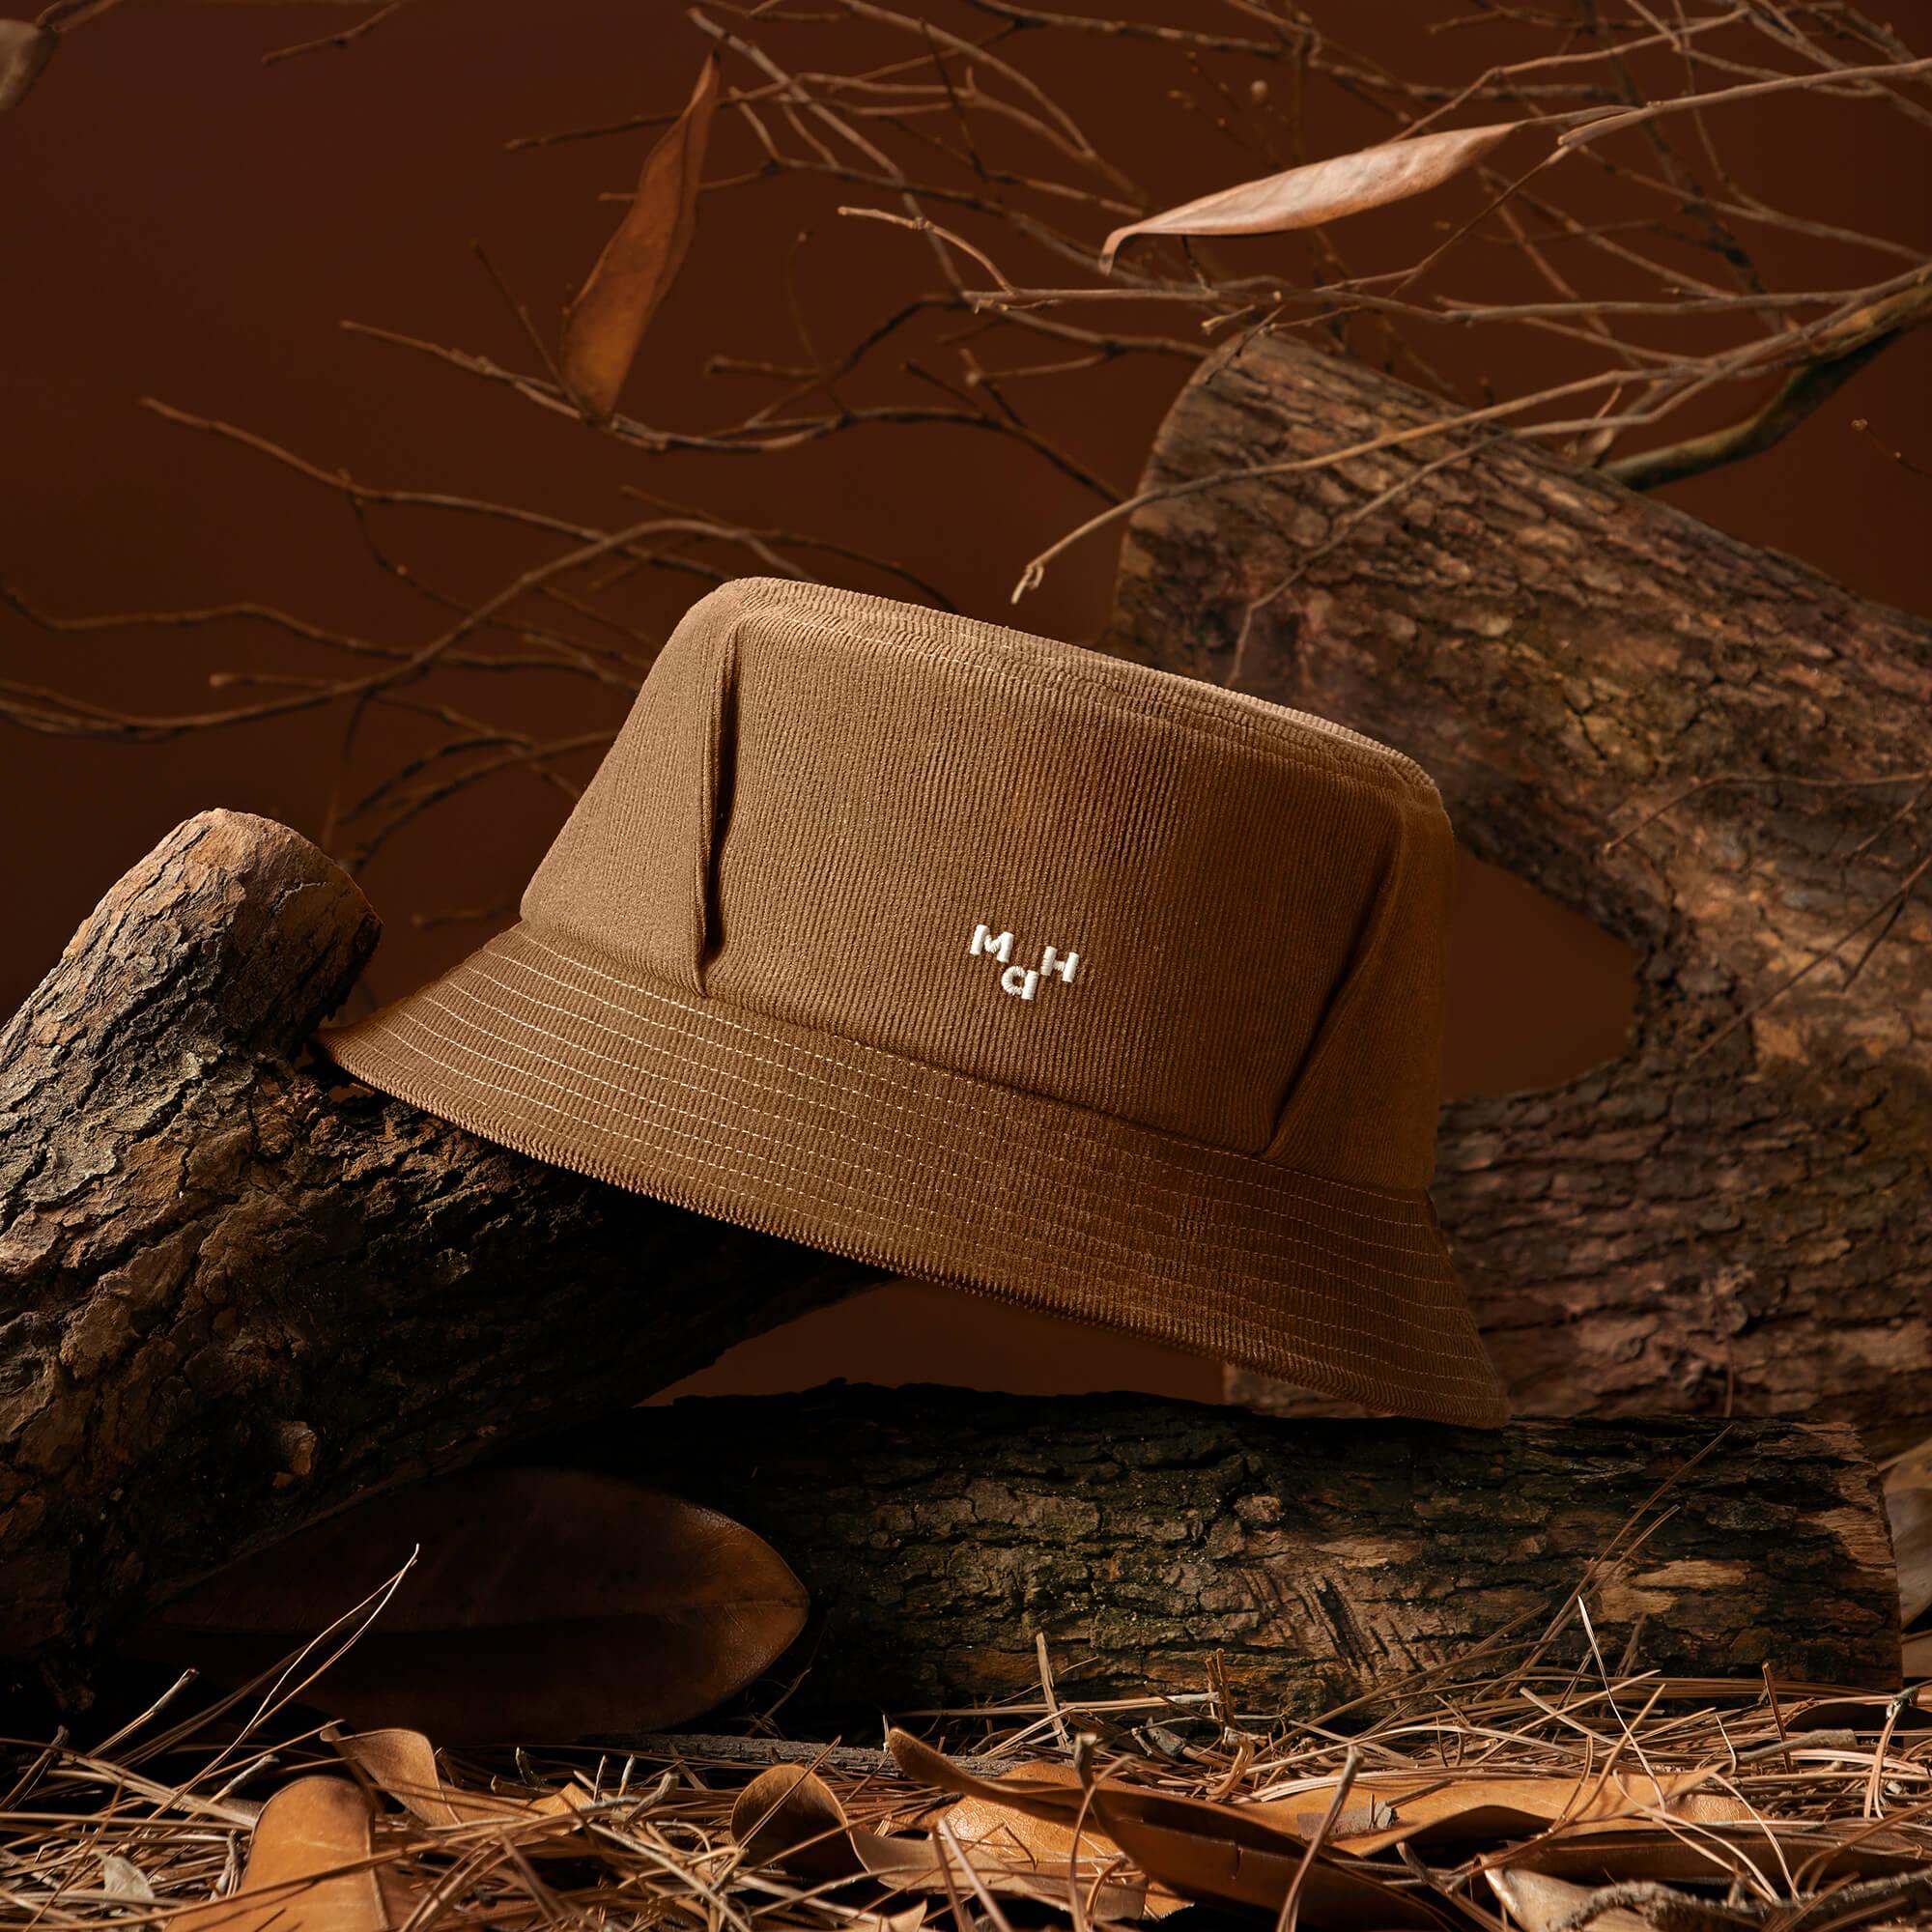 Corduroy Brown Hat For Adult